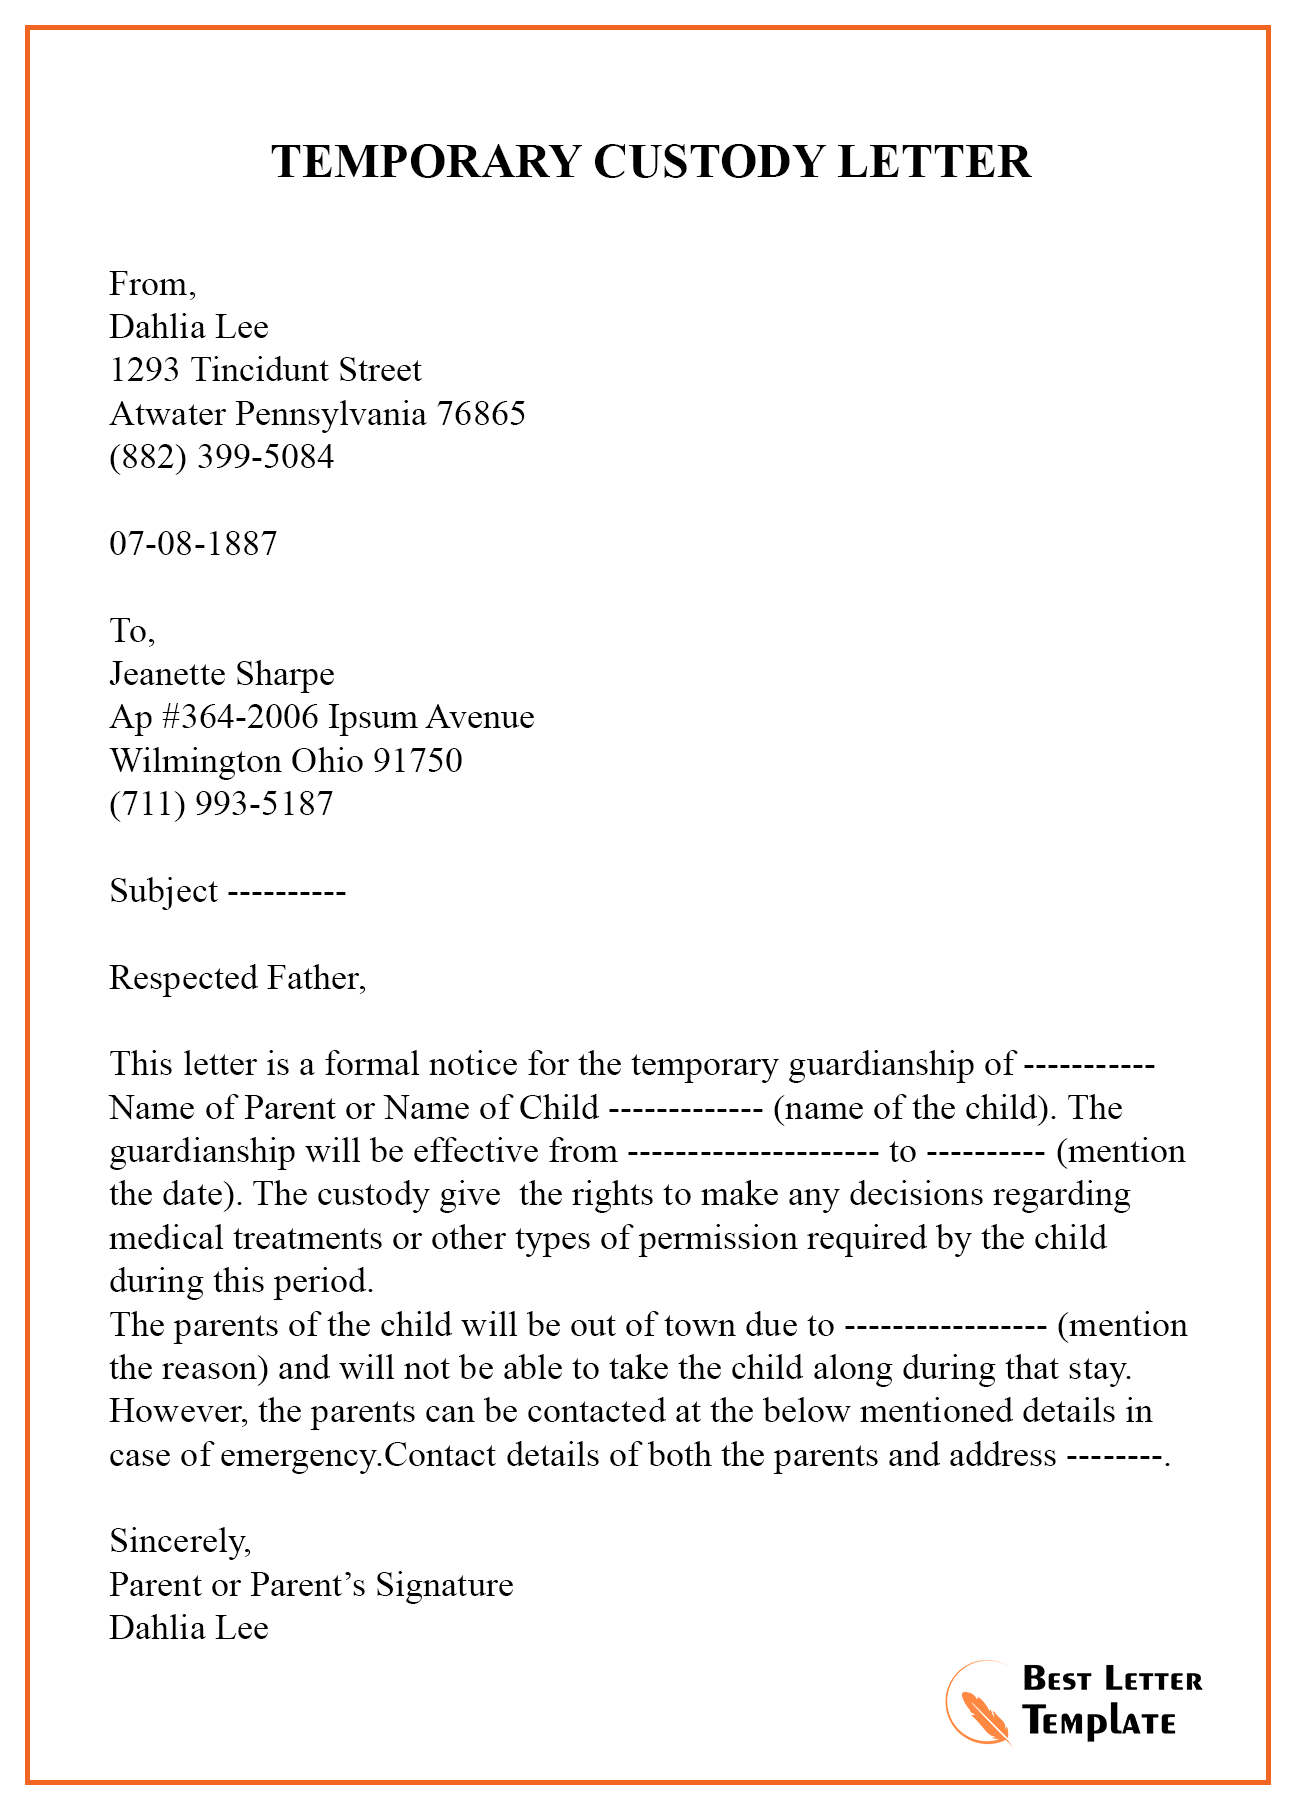 Writing A Temporary Guardianship Letter from bestlettertemplate.com